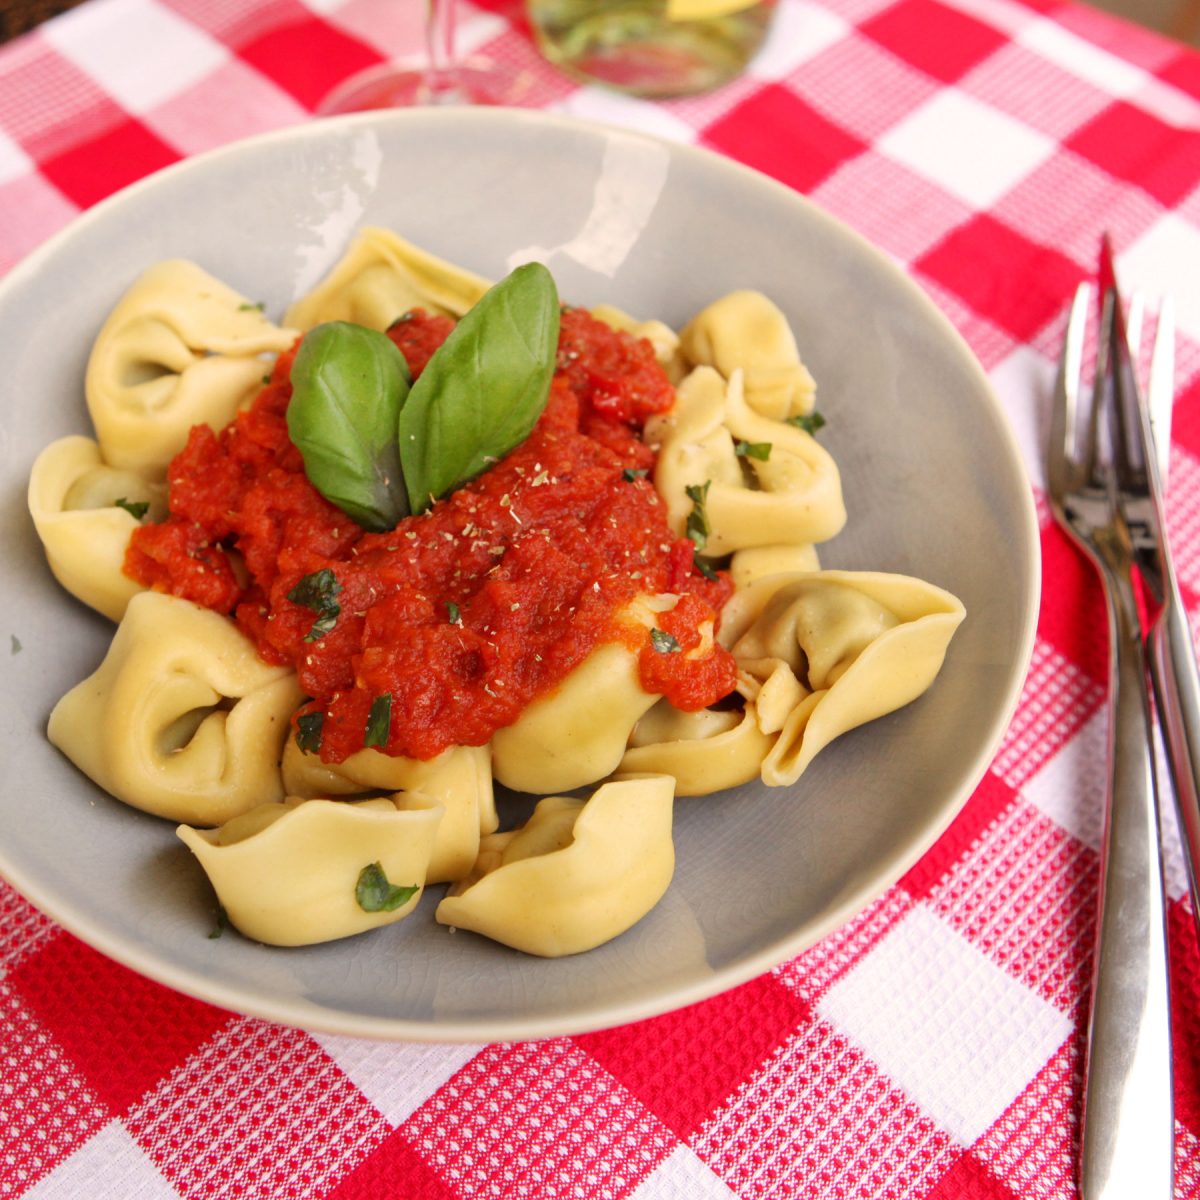 Spinach and Ricotta Tortellini | Free Vegetarian Meal Planning | Veahero